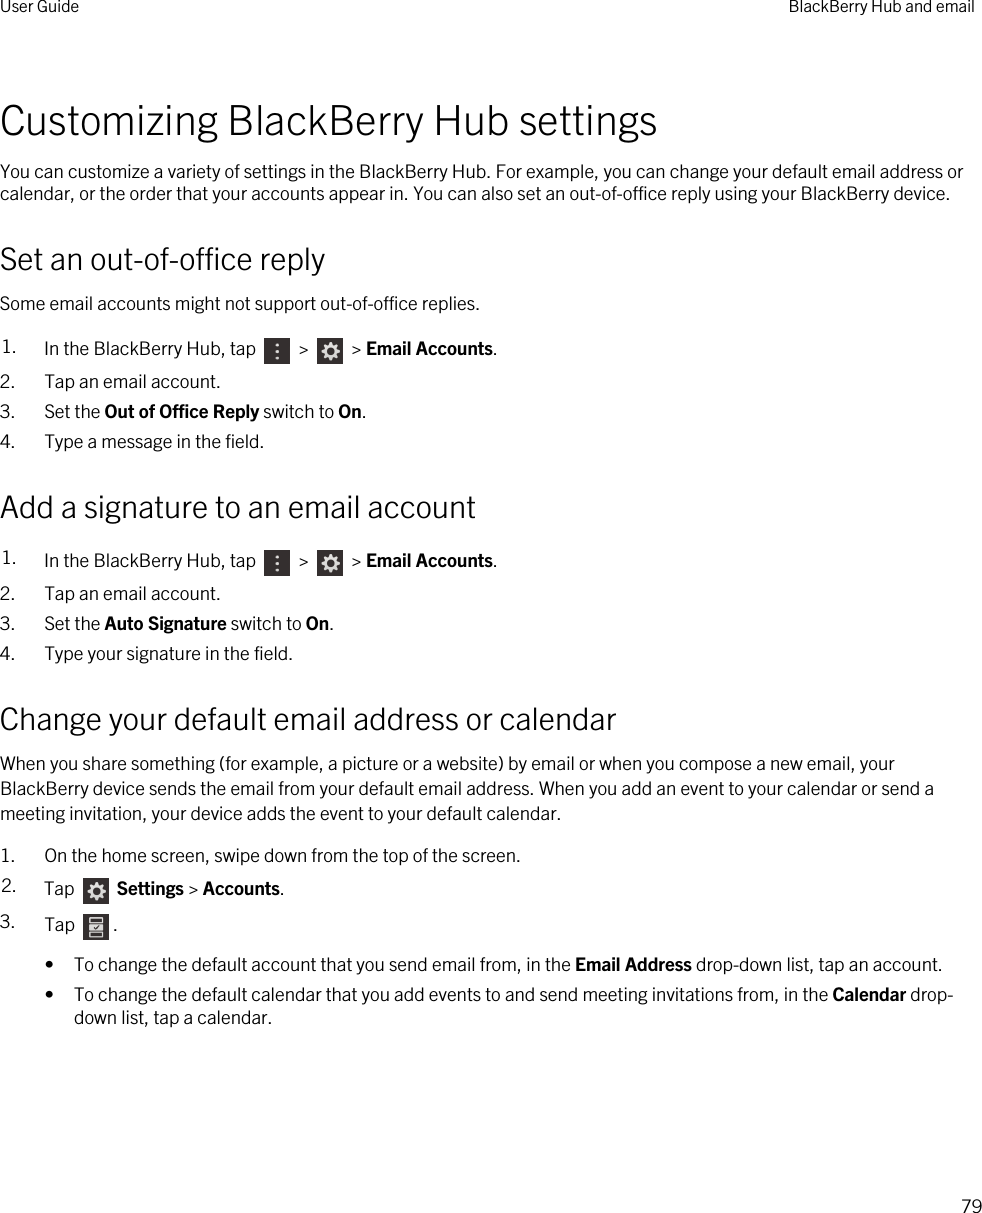 Customizing BlackBerry Hub settingsYou can customize a variety of settings in the BlackBerry Hub. For example, you can change your default email address or calendar, or the order that your accounts appear in. You can also set an out-of-office reply using your BlackBerry device.Set an out-of-office replySome email accounts might not support out-of-office replies.1. In the BlackBerry Hub, tap   &gt;   &gt; Email Accounts.2. Tap an email account.3. Set the Out of Office Reply switch to On.4. Type a message in the field.Add a signature to an email account1. In the BlackBerry Hub, tap   &gt;   &gt; Email Accounts.2. Tap an email account.3. Set the Auto Signature switch to On.4. Type your signature in the field.Change your default email address or calendarWhen you share something (for example, a picture or a website) by email or when you compose a new email, your BlackBerry device sends the email from your default email address. When you add an event to your calendar or send a meeting invitation, your device adds the event to your default calendar.1. On the home screen, swipe down from the top of the screen.2. Tap   Settings &gt; Accounts.3. Tap  .• To change the default account that you send email from, in the Email Address drop-down list, tap an account.• To change the default calendar that you add events to and send meeting invitations from, in the Calendar drop-down list, tap a calendar.User Guide BlackBerry Hub and email79